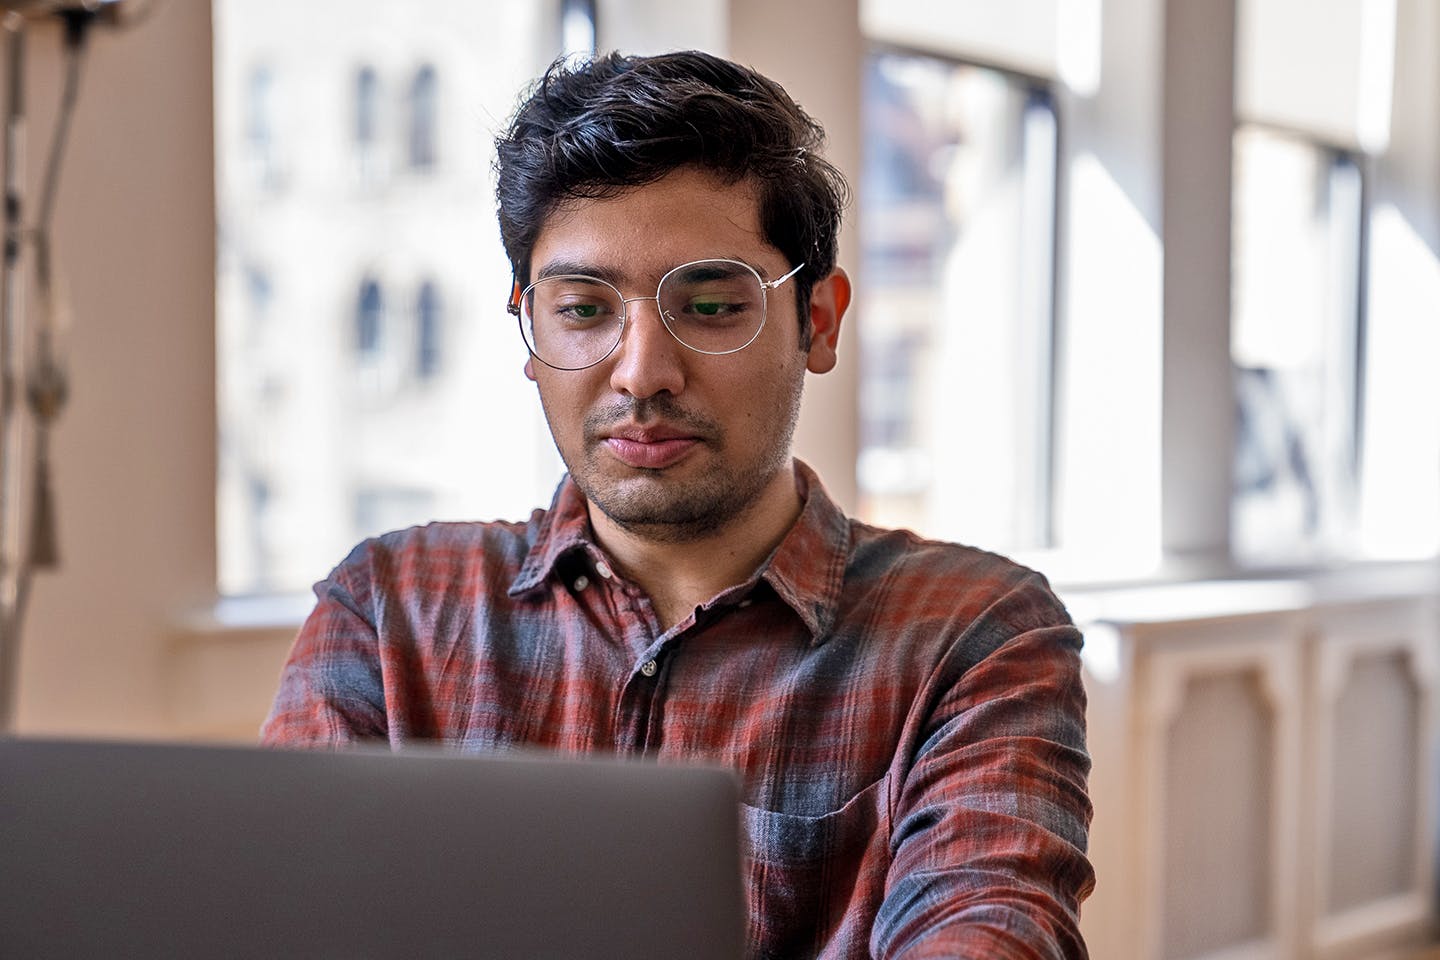 A bespectacled student works at a laptop